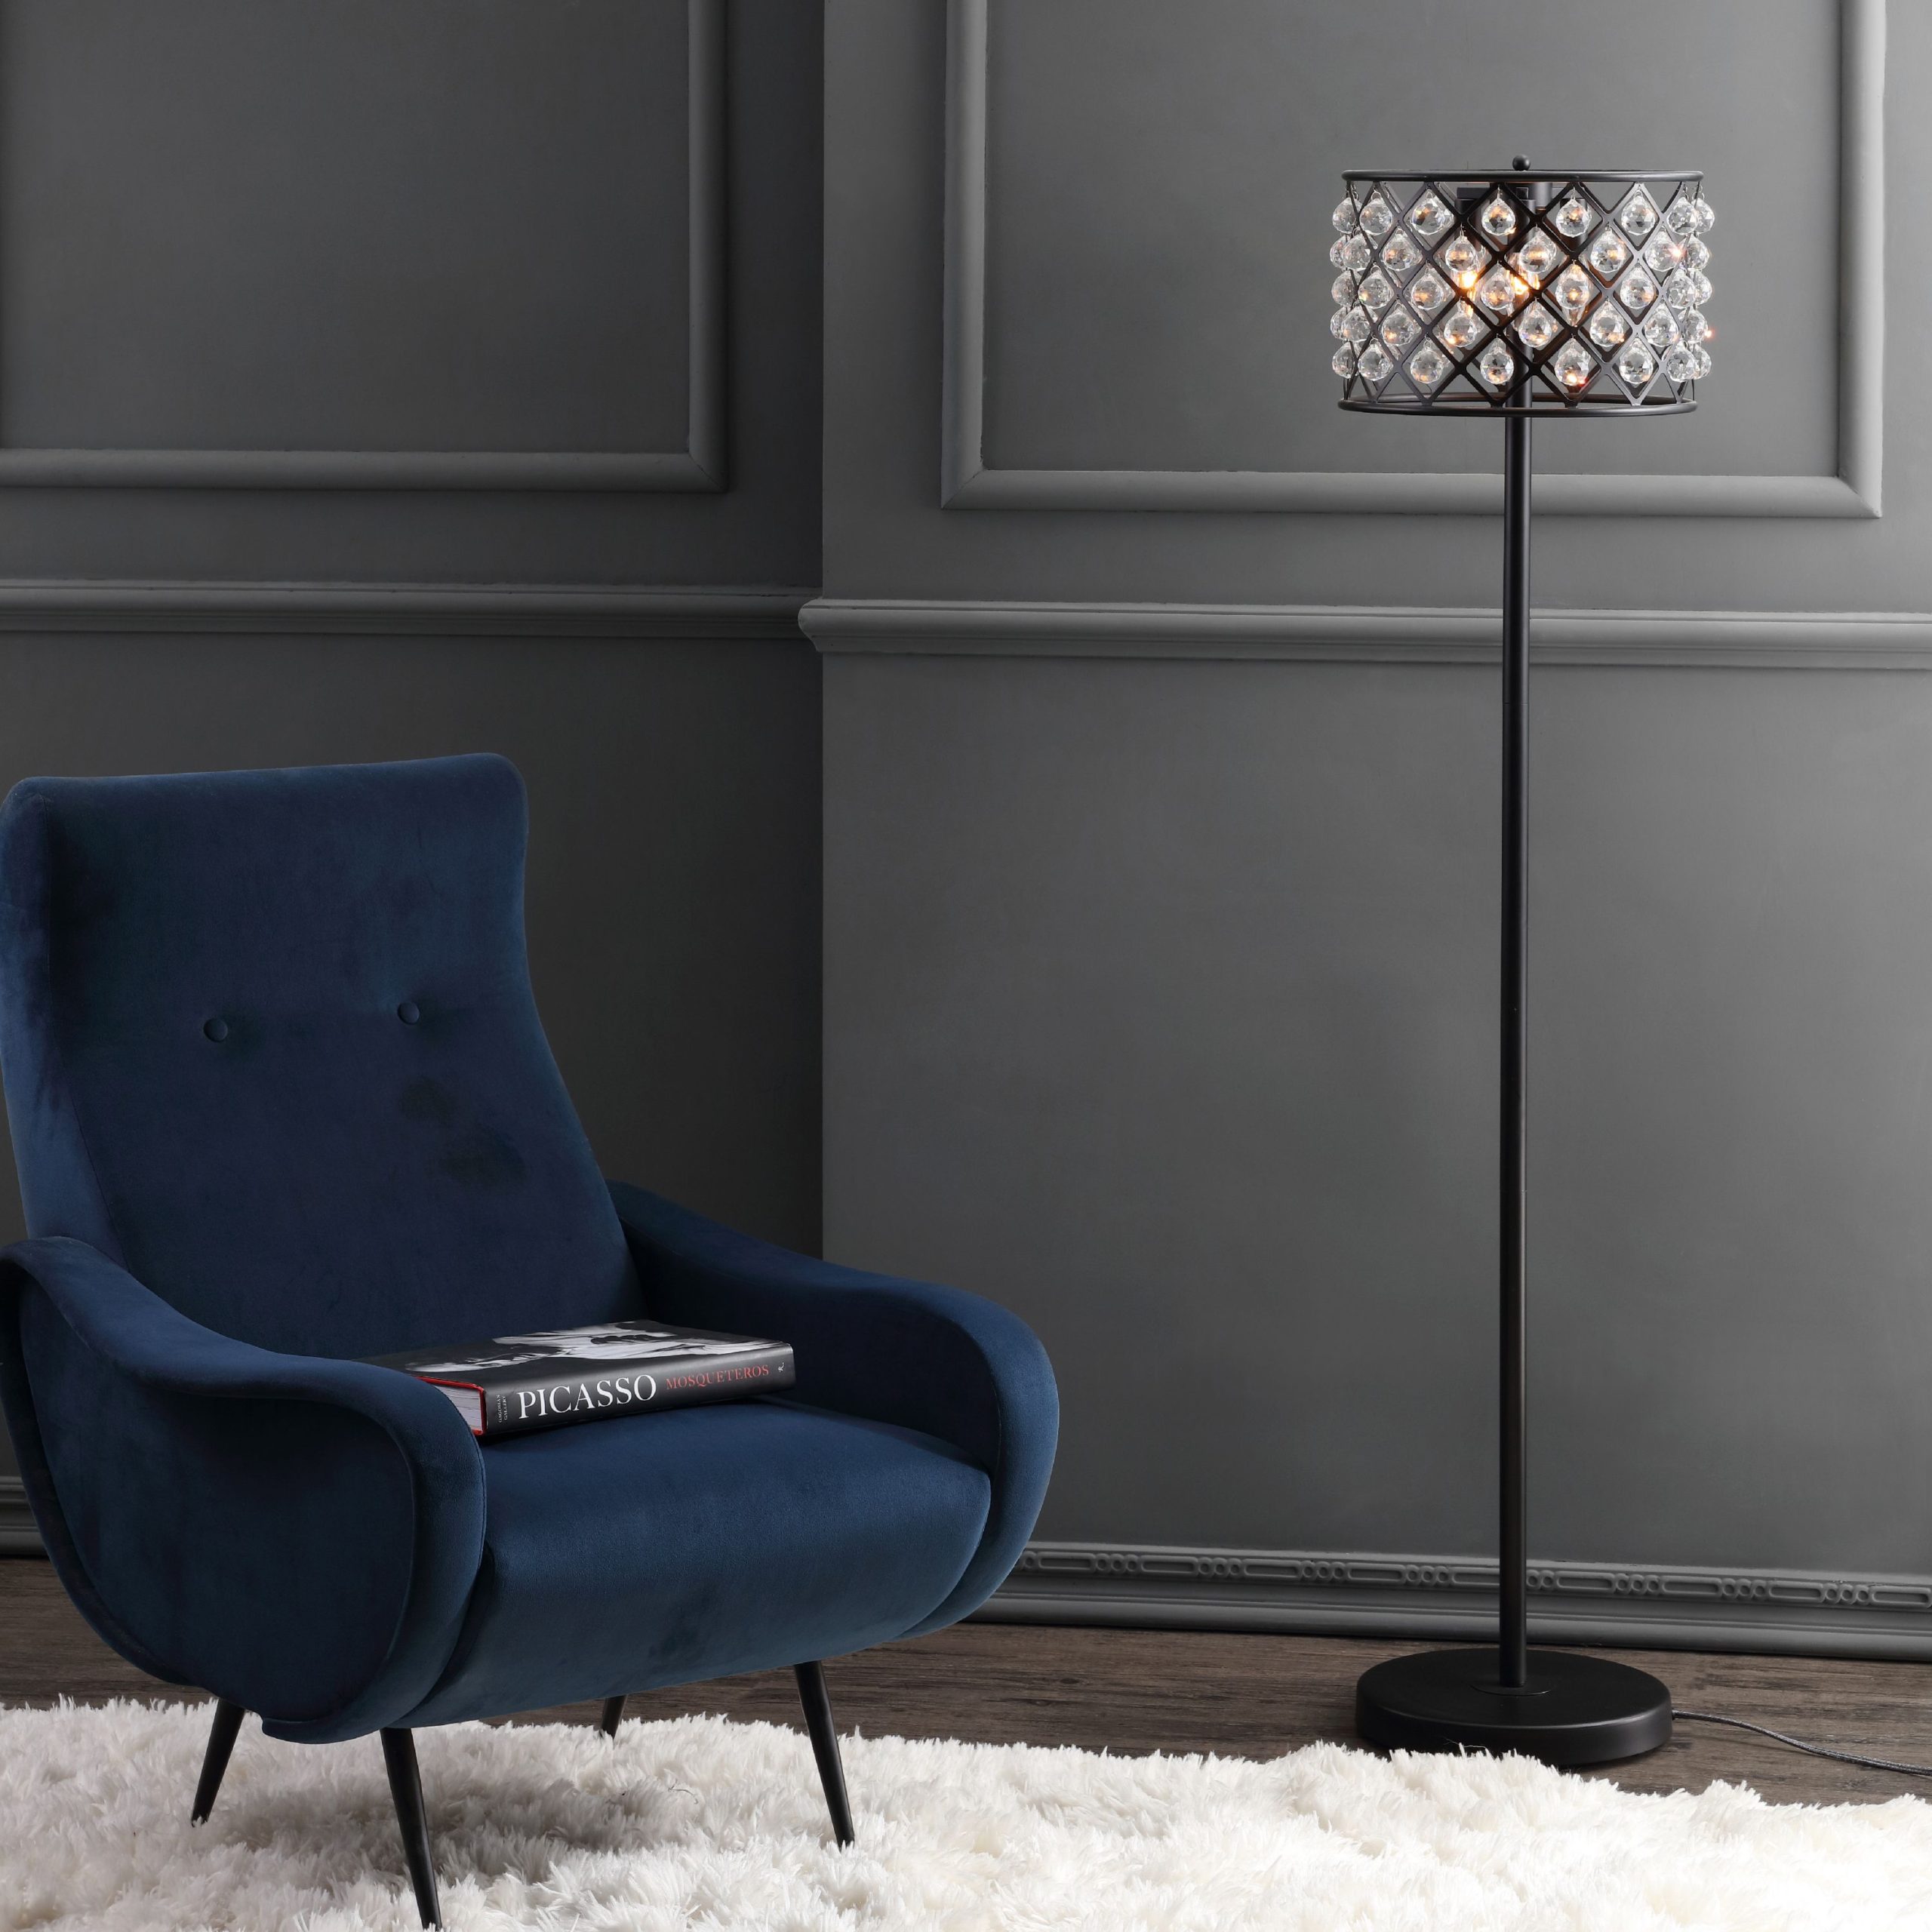 JONATHAN-scaled 15 Unique Artistic Floor Lamps to Light Your Bedroom